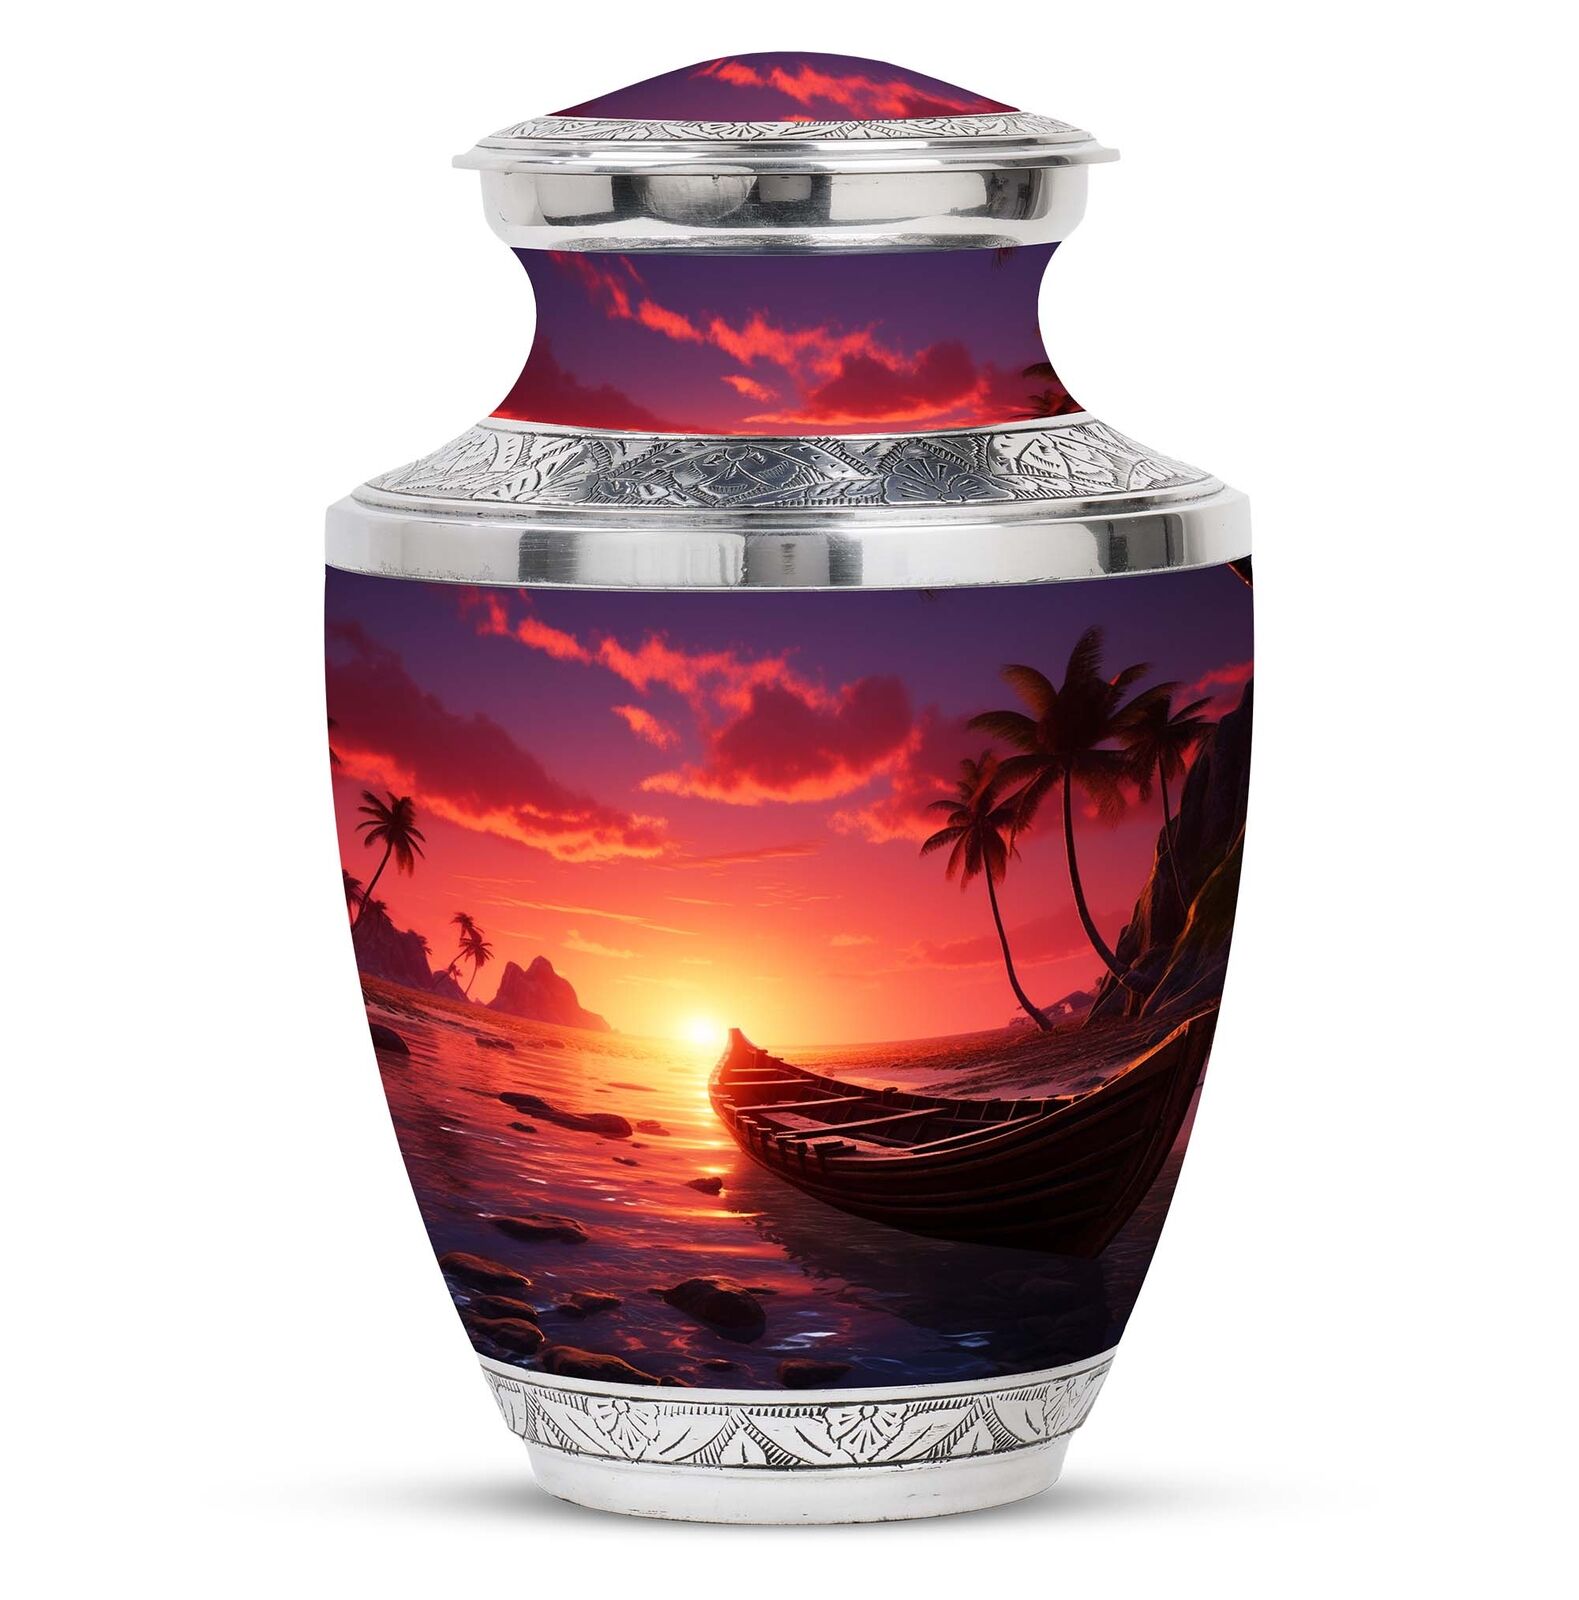 Twilight Glow on a Secluded Cove Large Urns For Human Remains Size 10 Inch